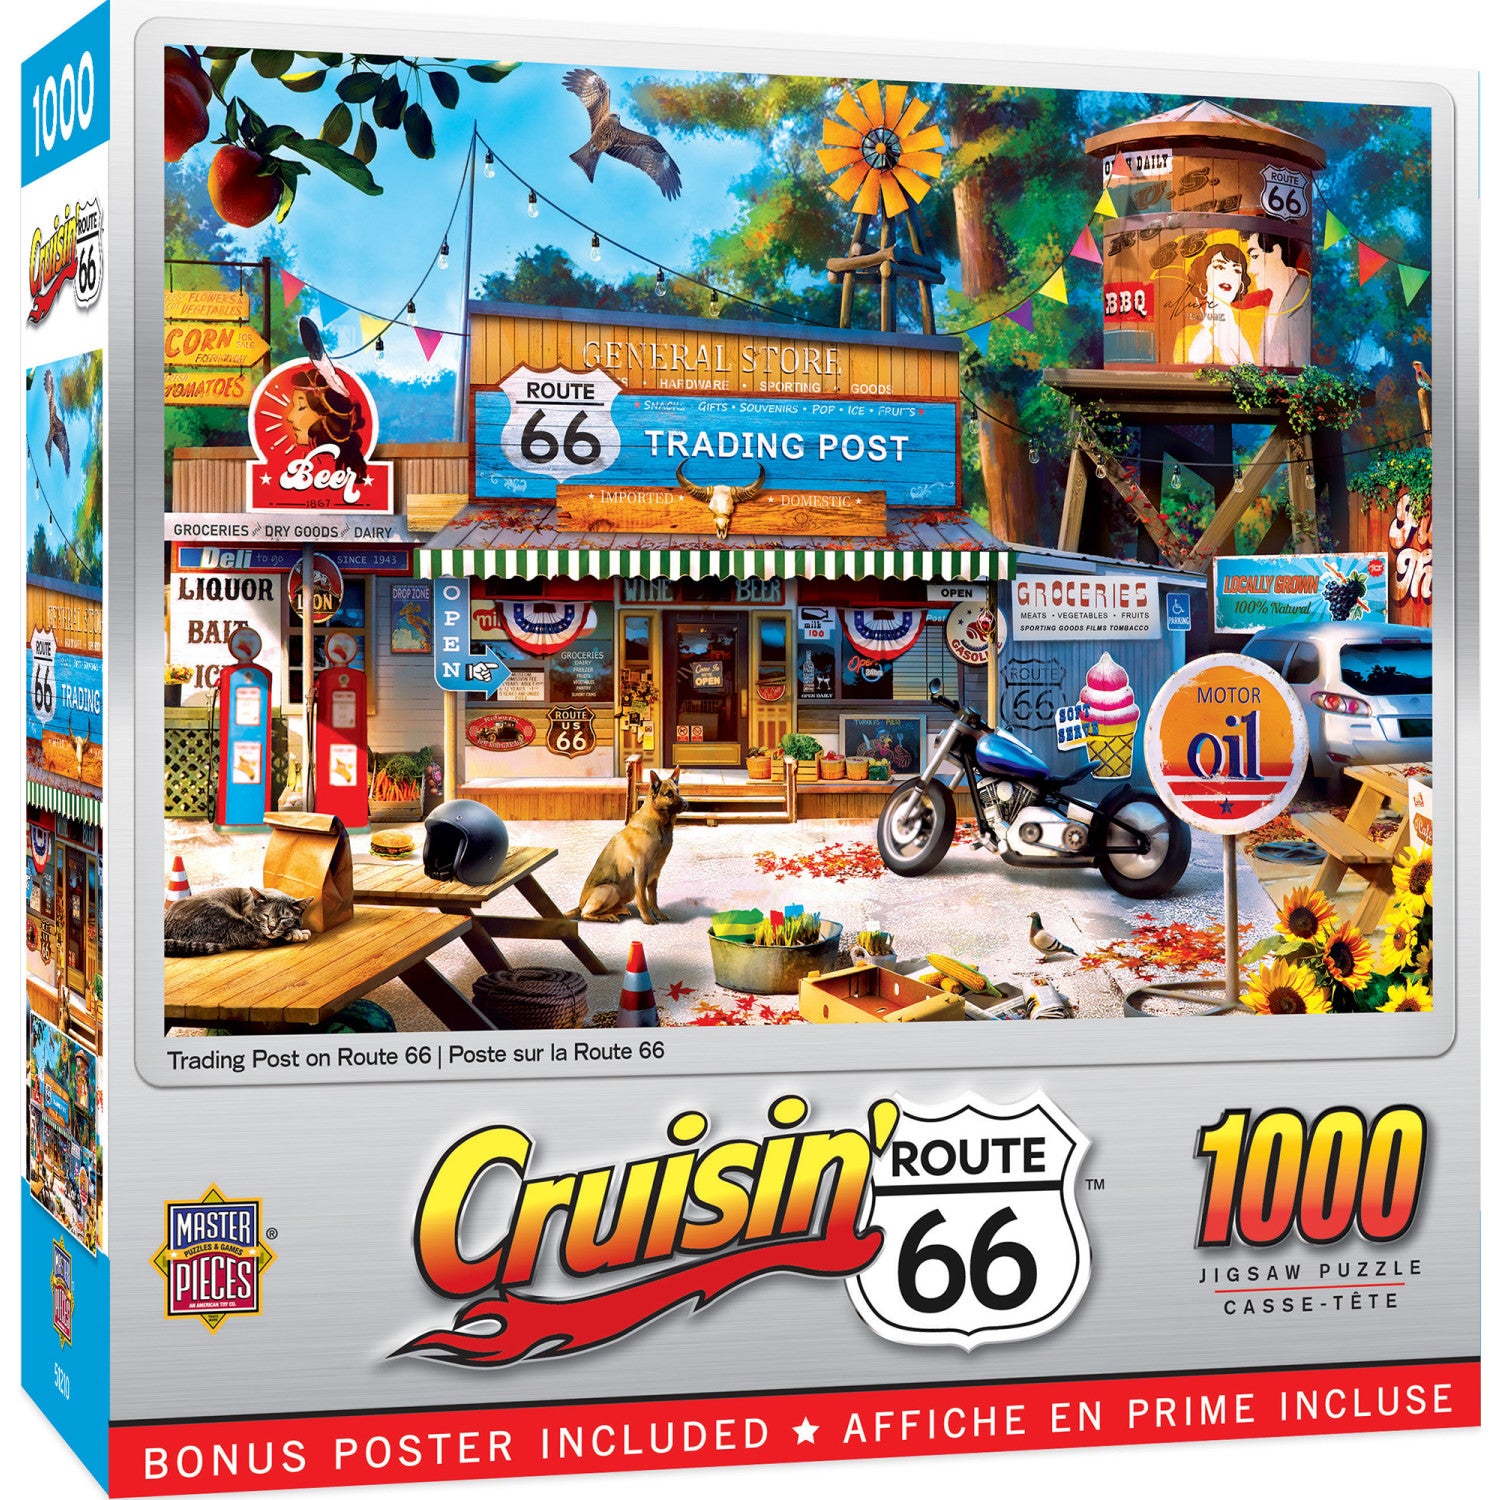 Cruisin' Route 66 - Trading Post on Route 66 1000 Piece Puzzle